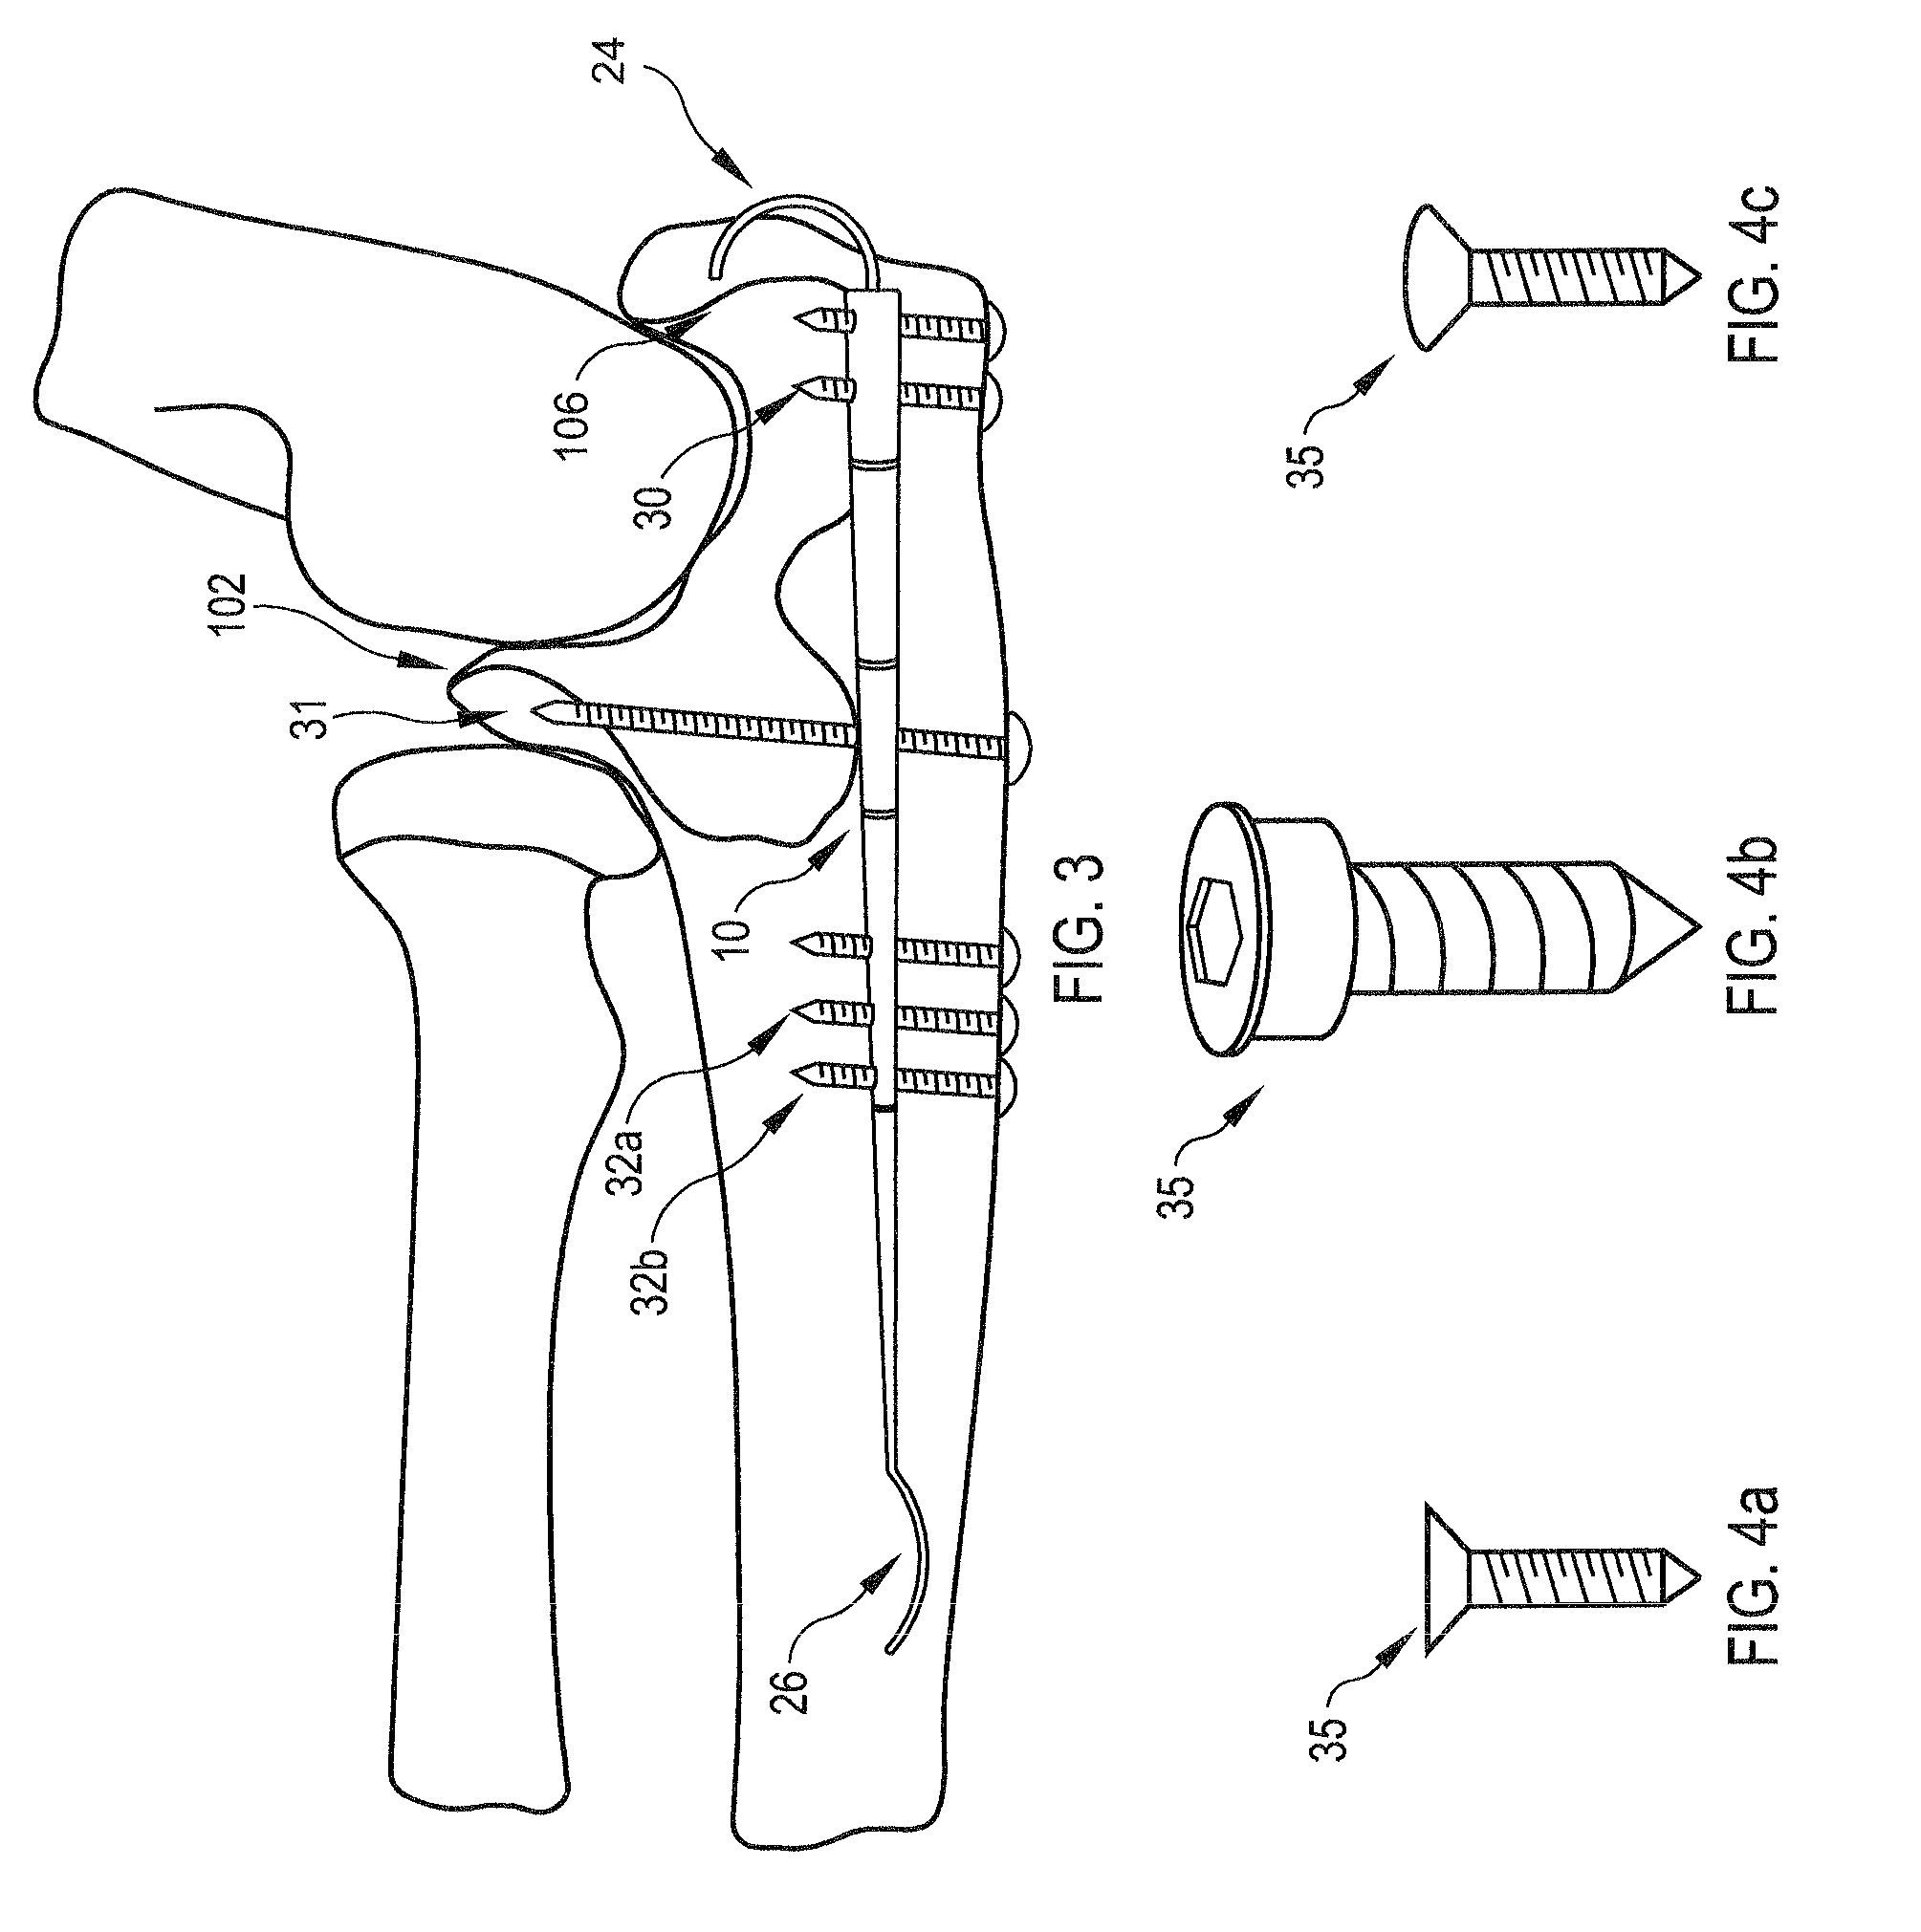 Fixation device for proximal elbow fractures and method of using same